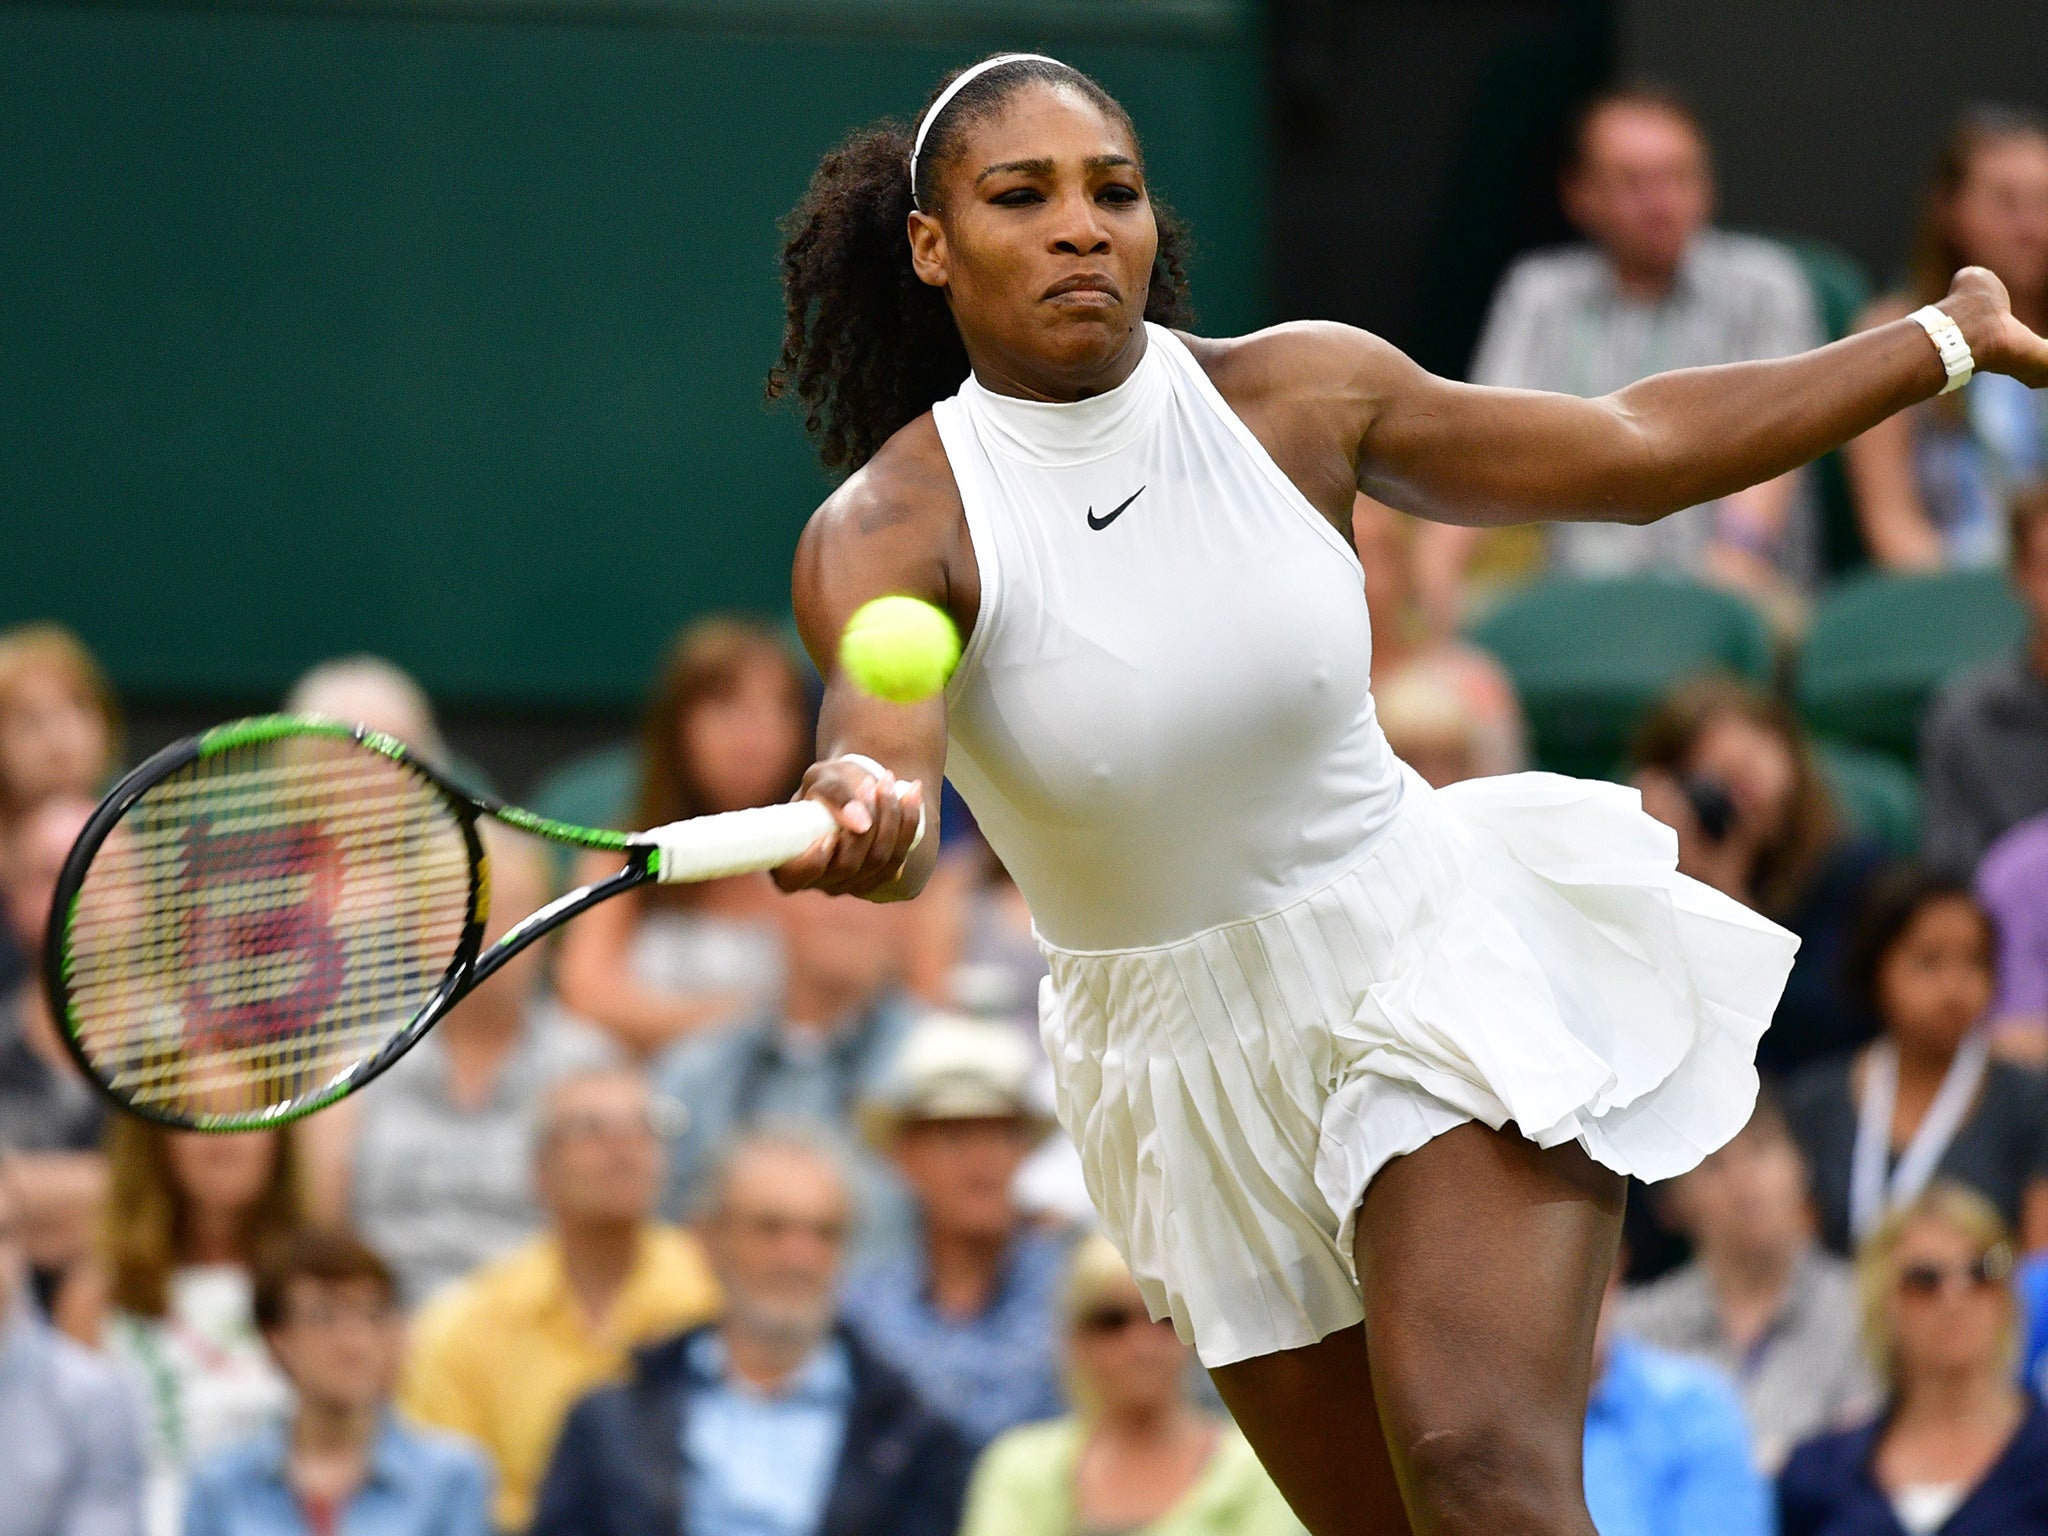 Williams was concerned by the slipperiness underfoot on Centre Court